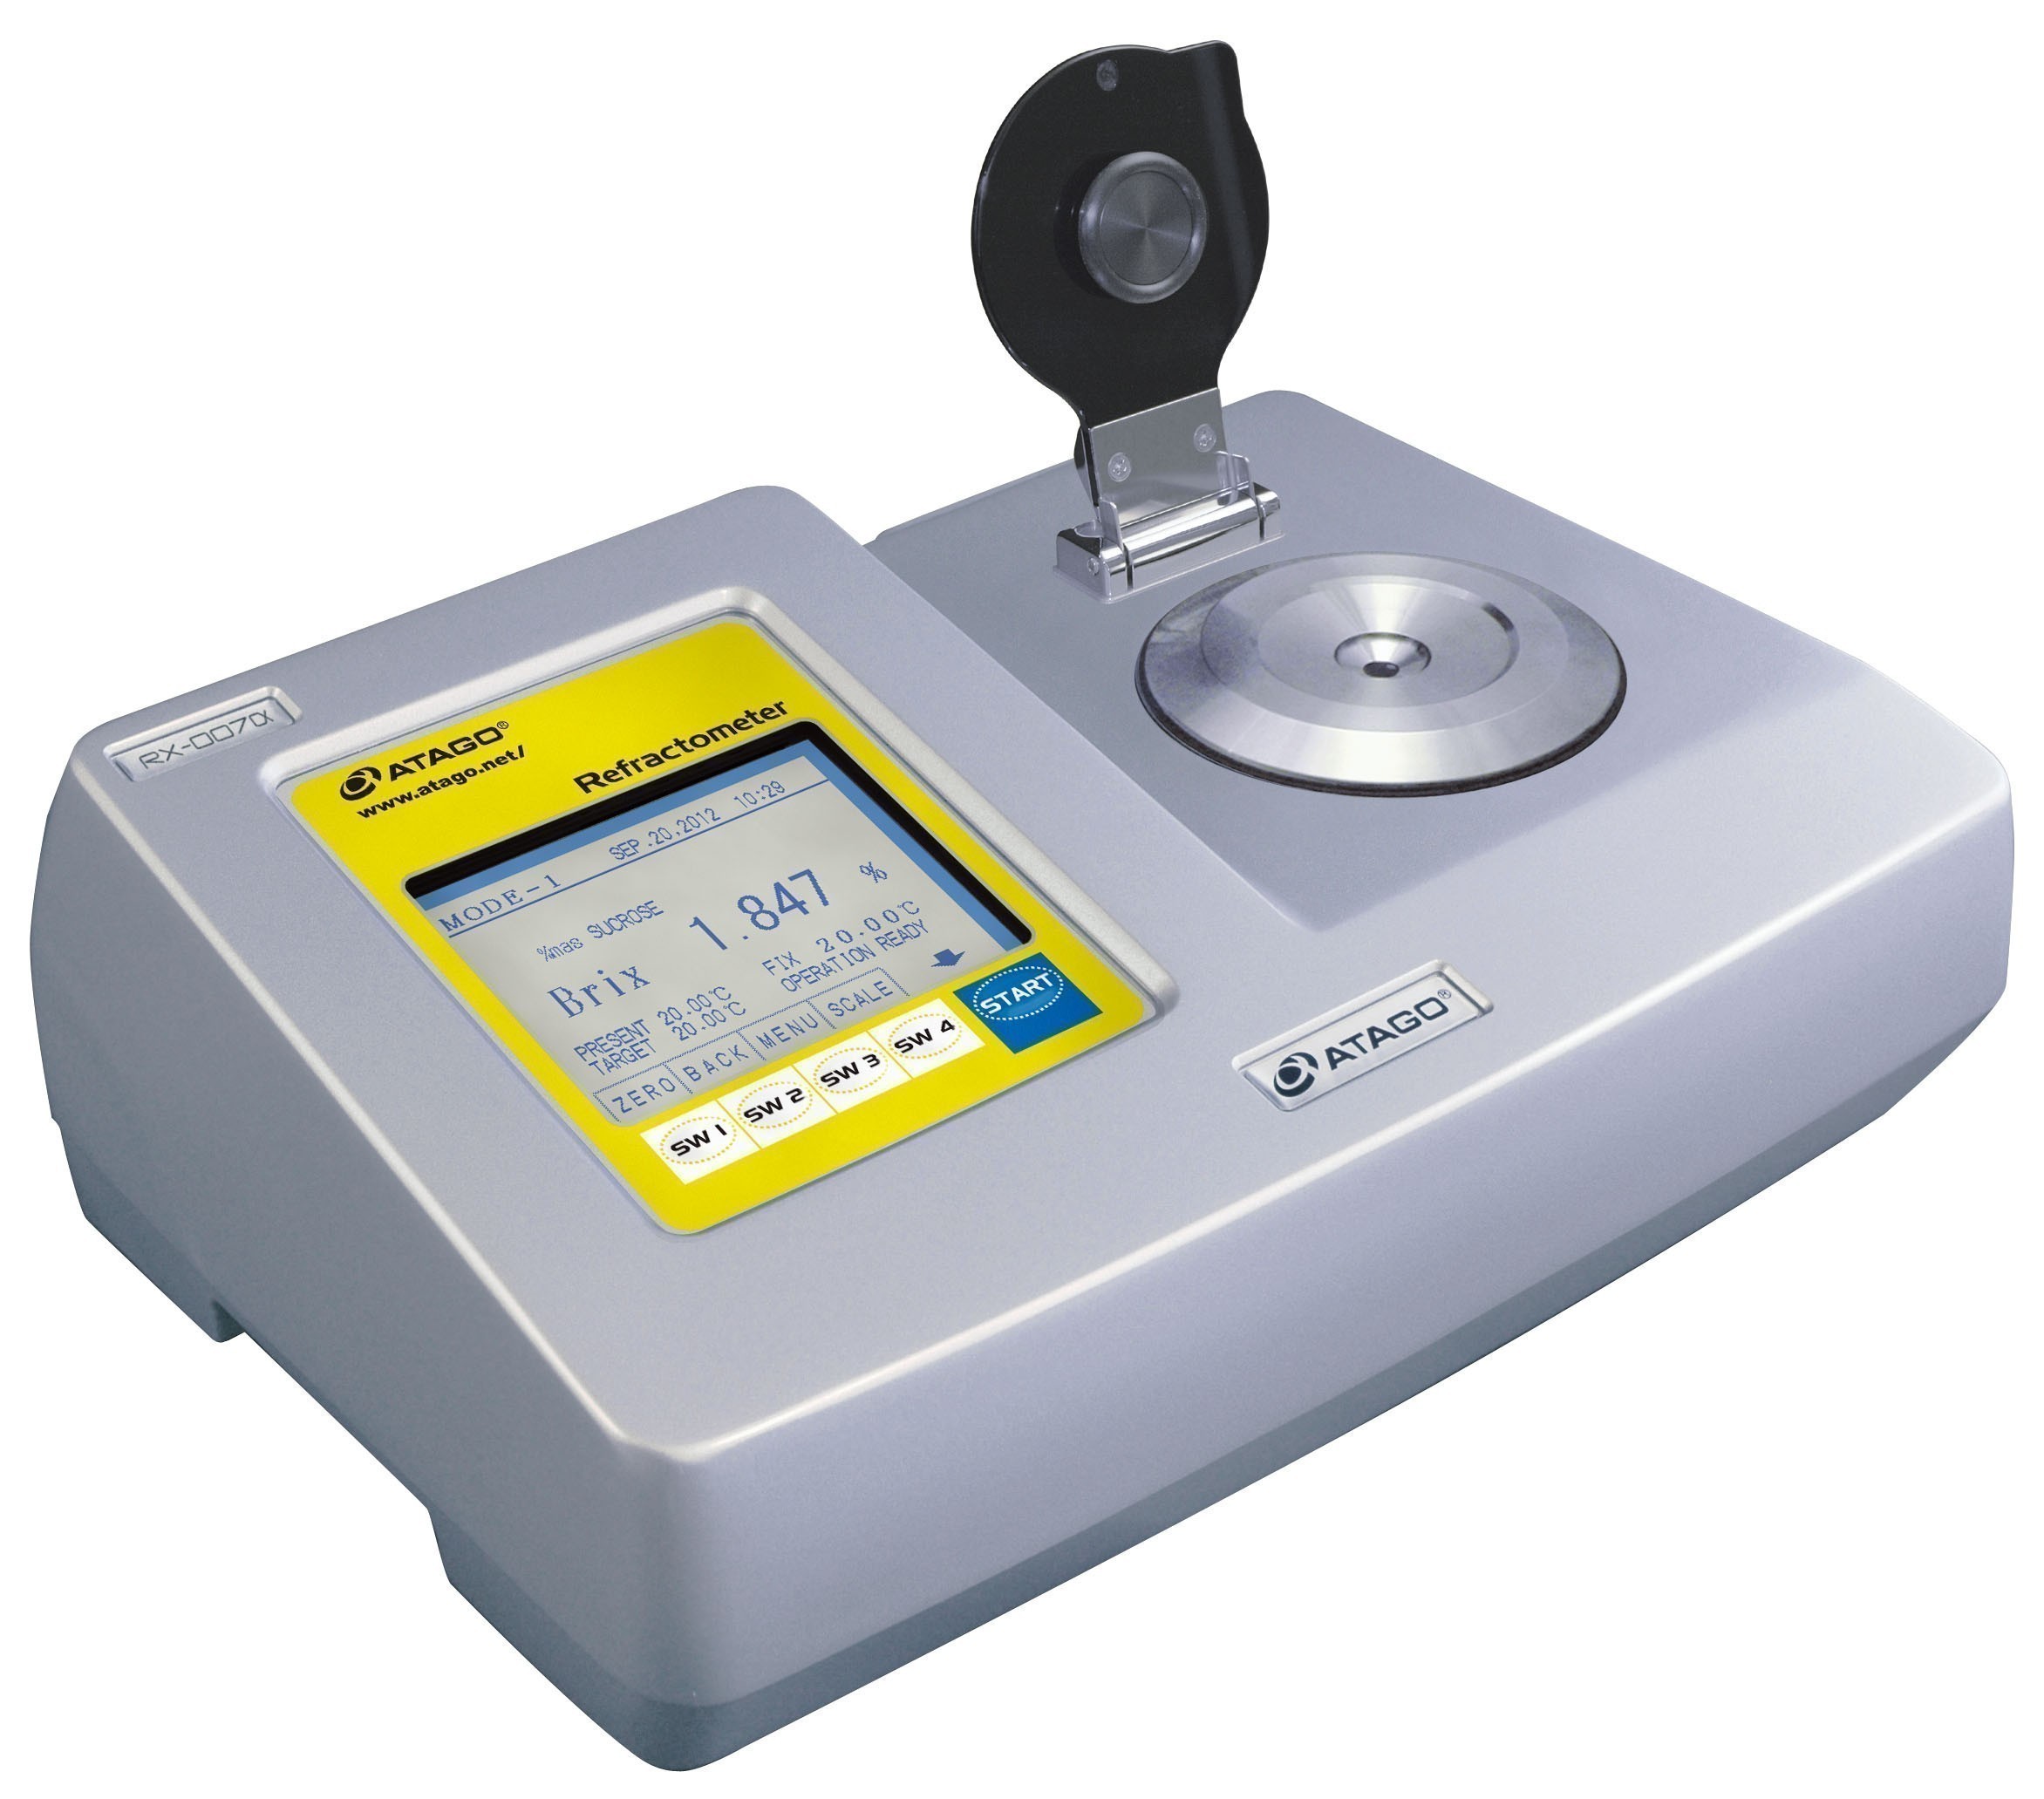 Atago 3921 RX-007a Automatic Bench-Top Digital Refractometers, Refractive index (RI) : 1.330150 to 1.341500 Measurement Range